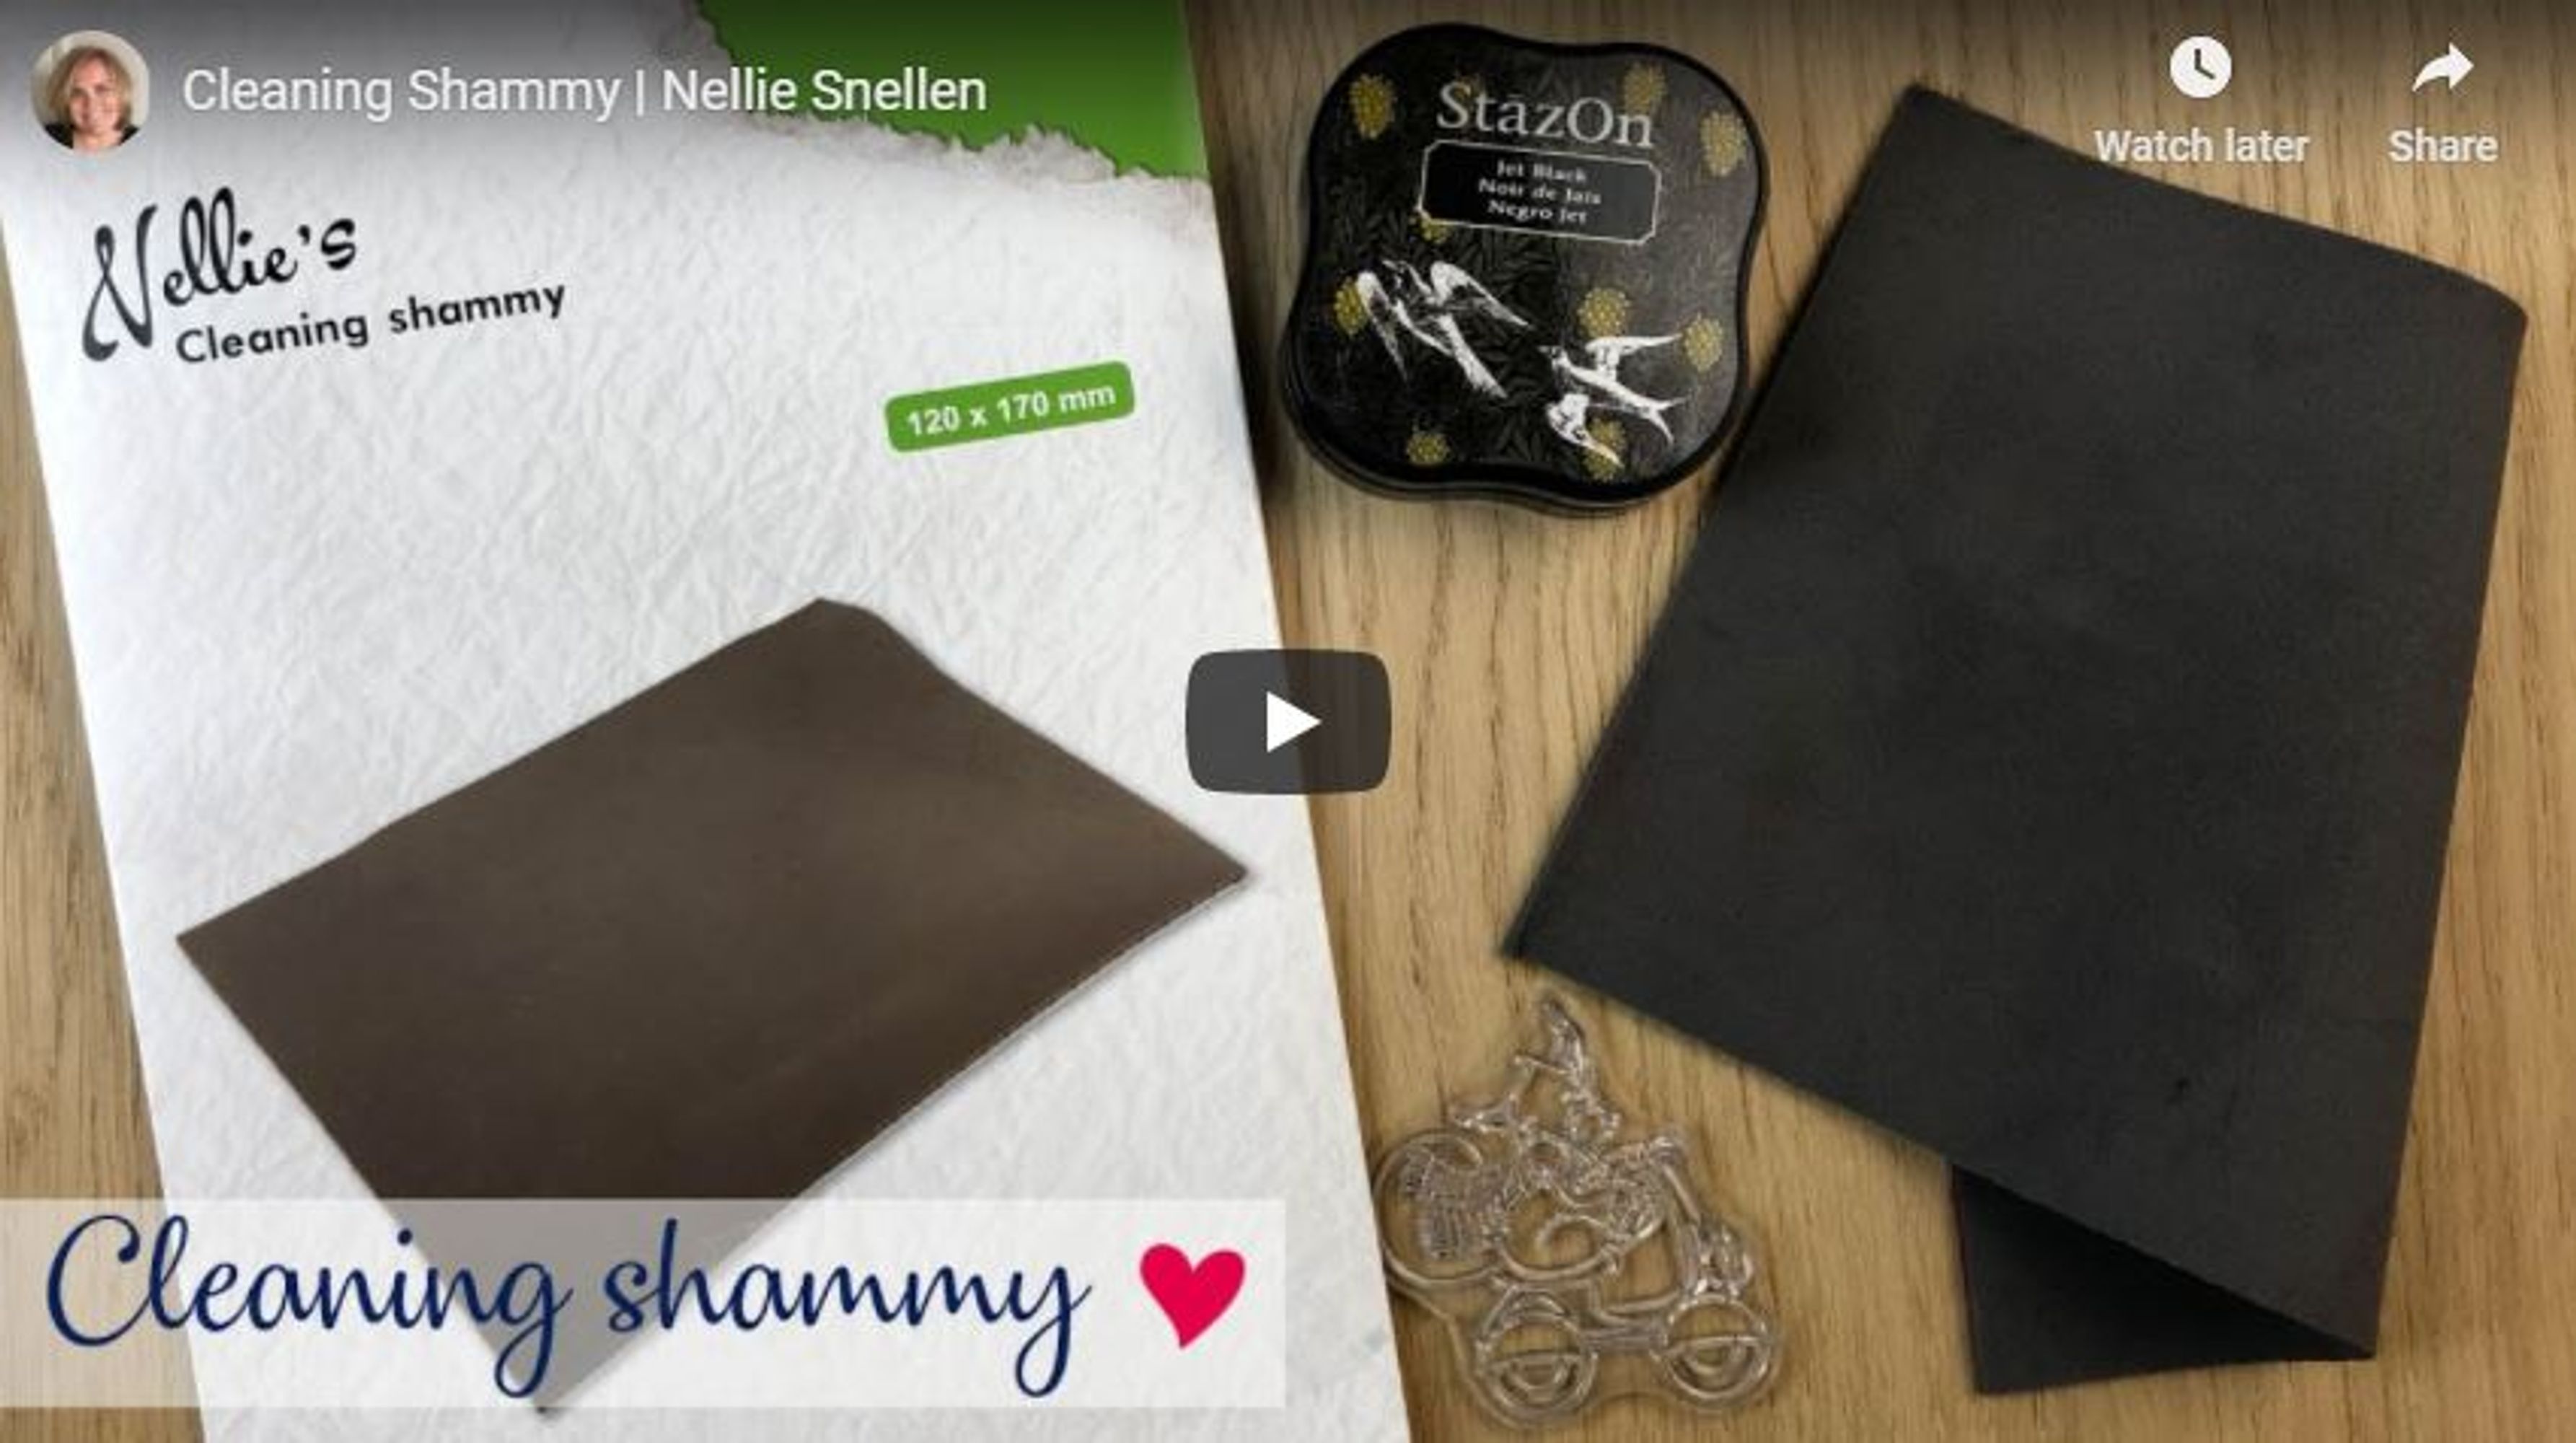 Nellie's Choice Shammy Cleaning Towel